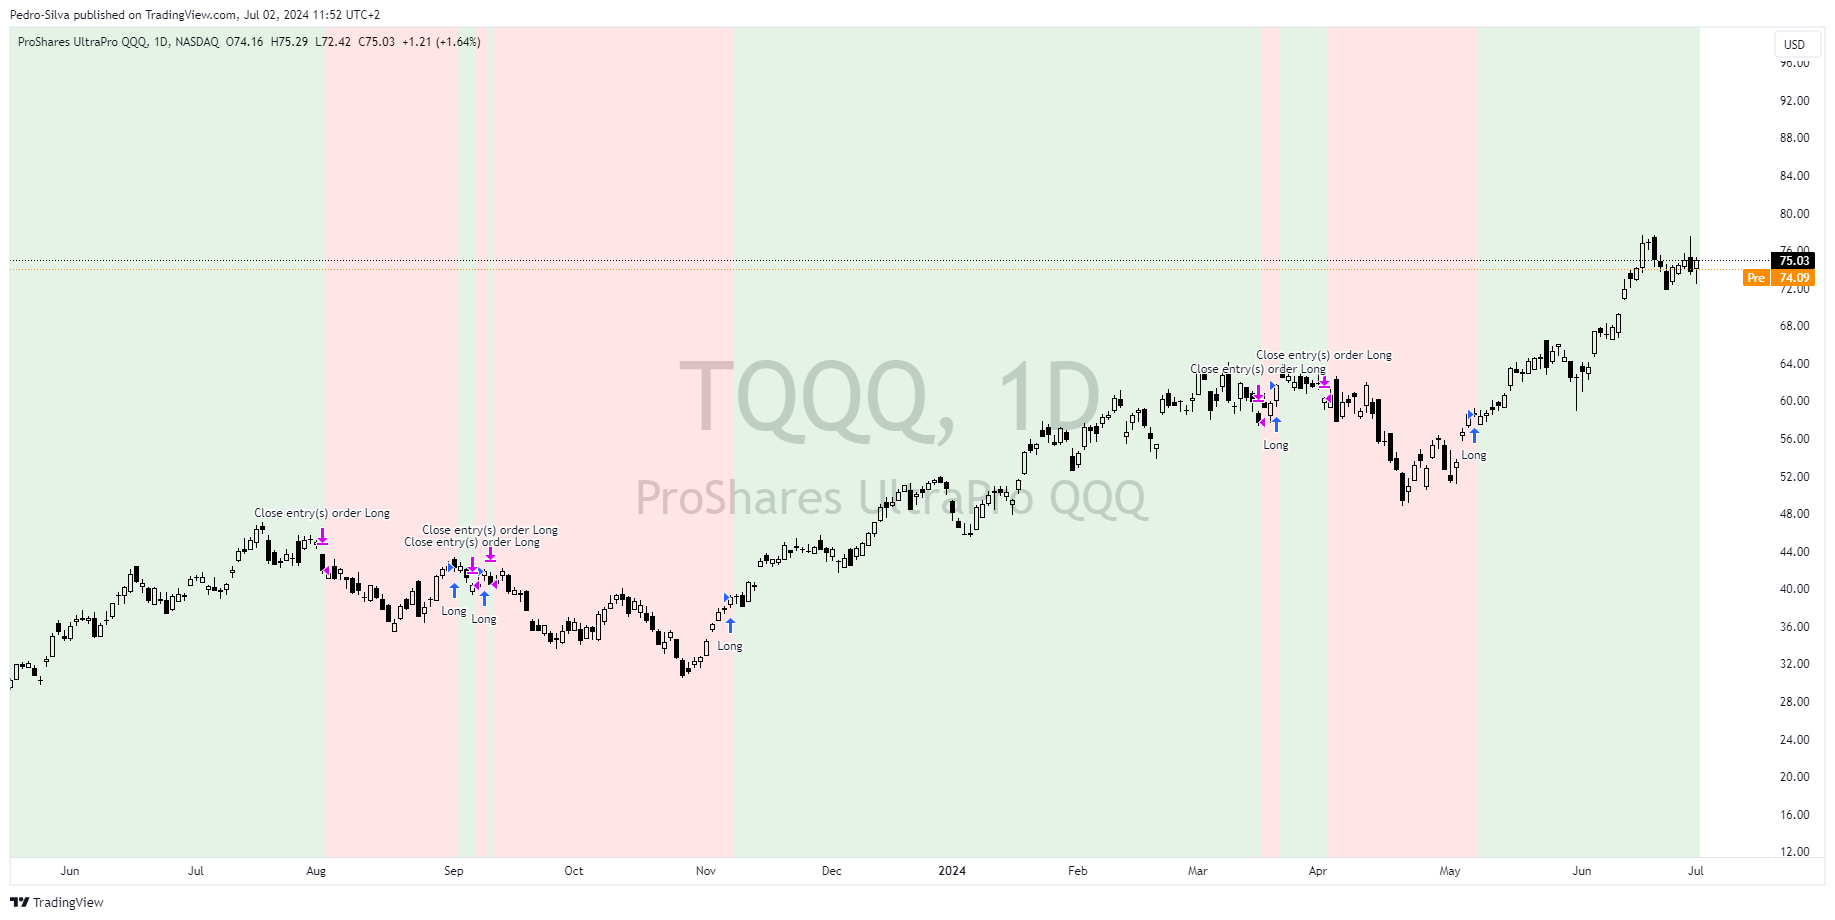 Chart of TQQQ showing a significant price advance since the buy signal on May 8